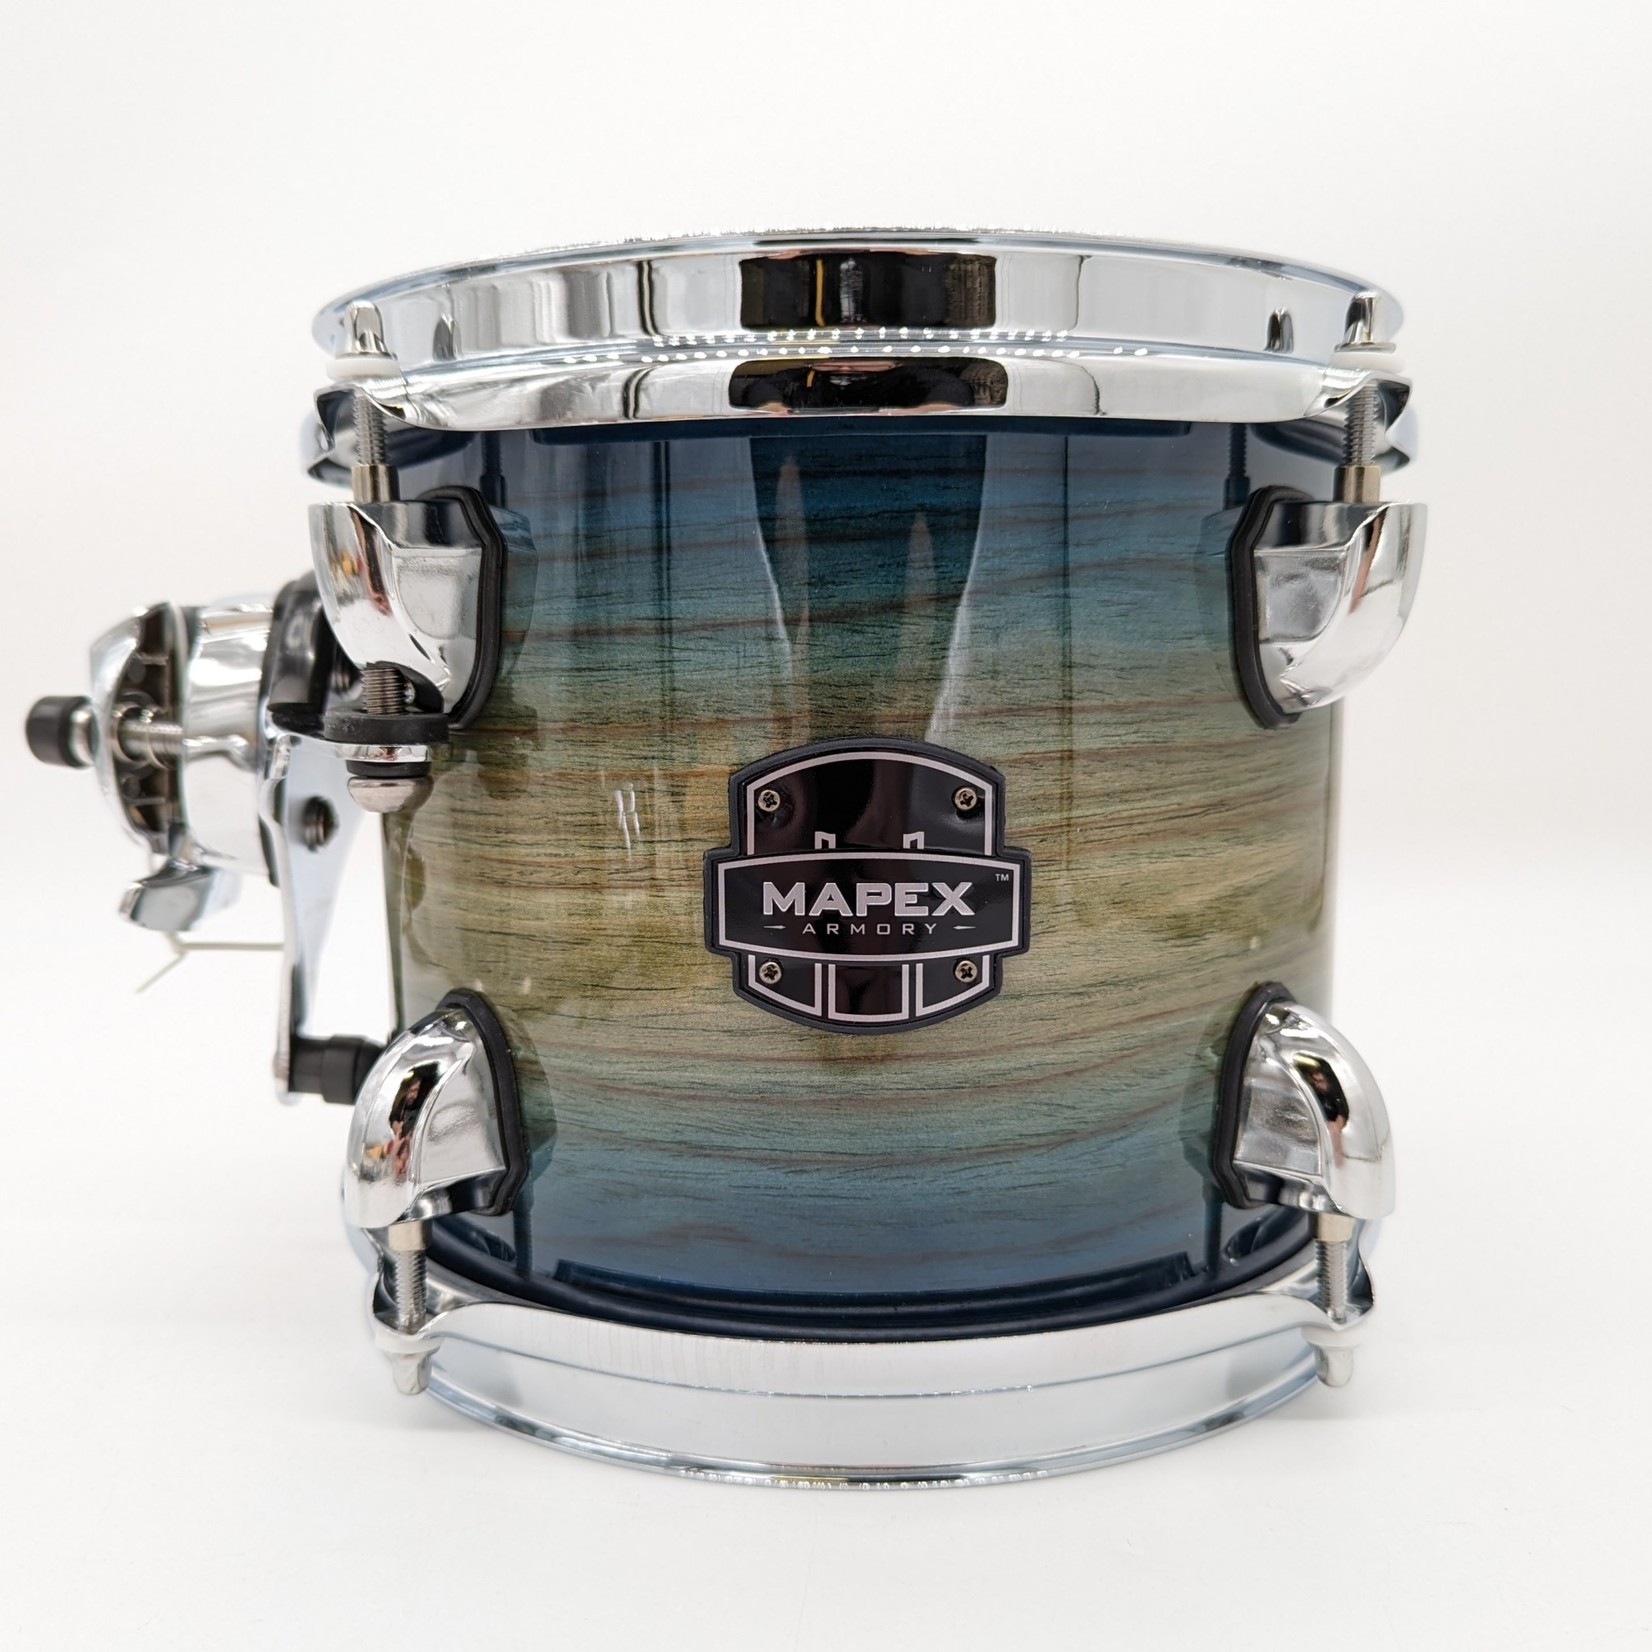 Mapex Mapex Armory 8 x 7" Tom Pack with SONIClear Tom Holder (Rainforest Burst)